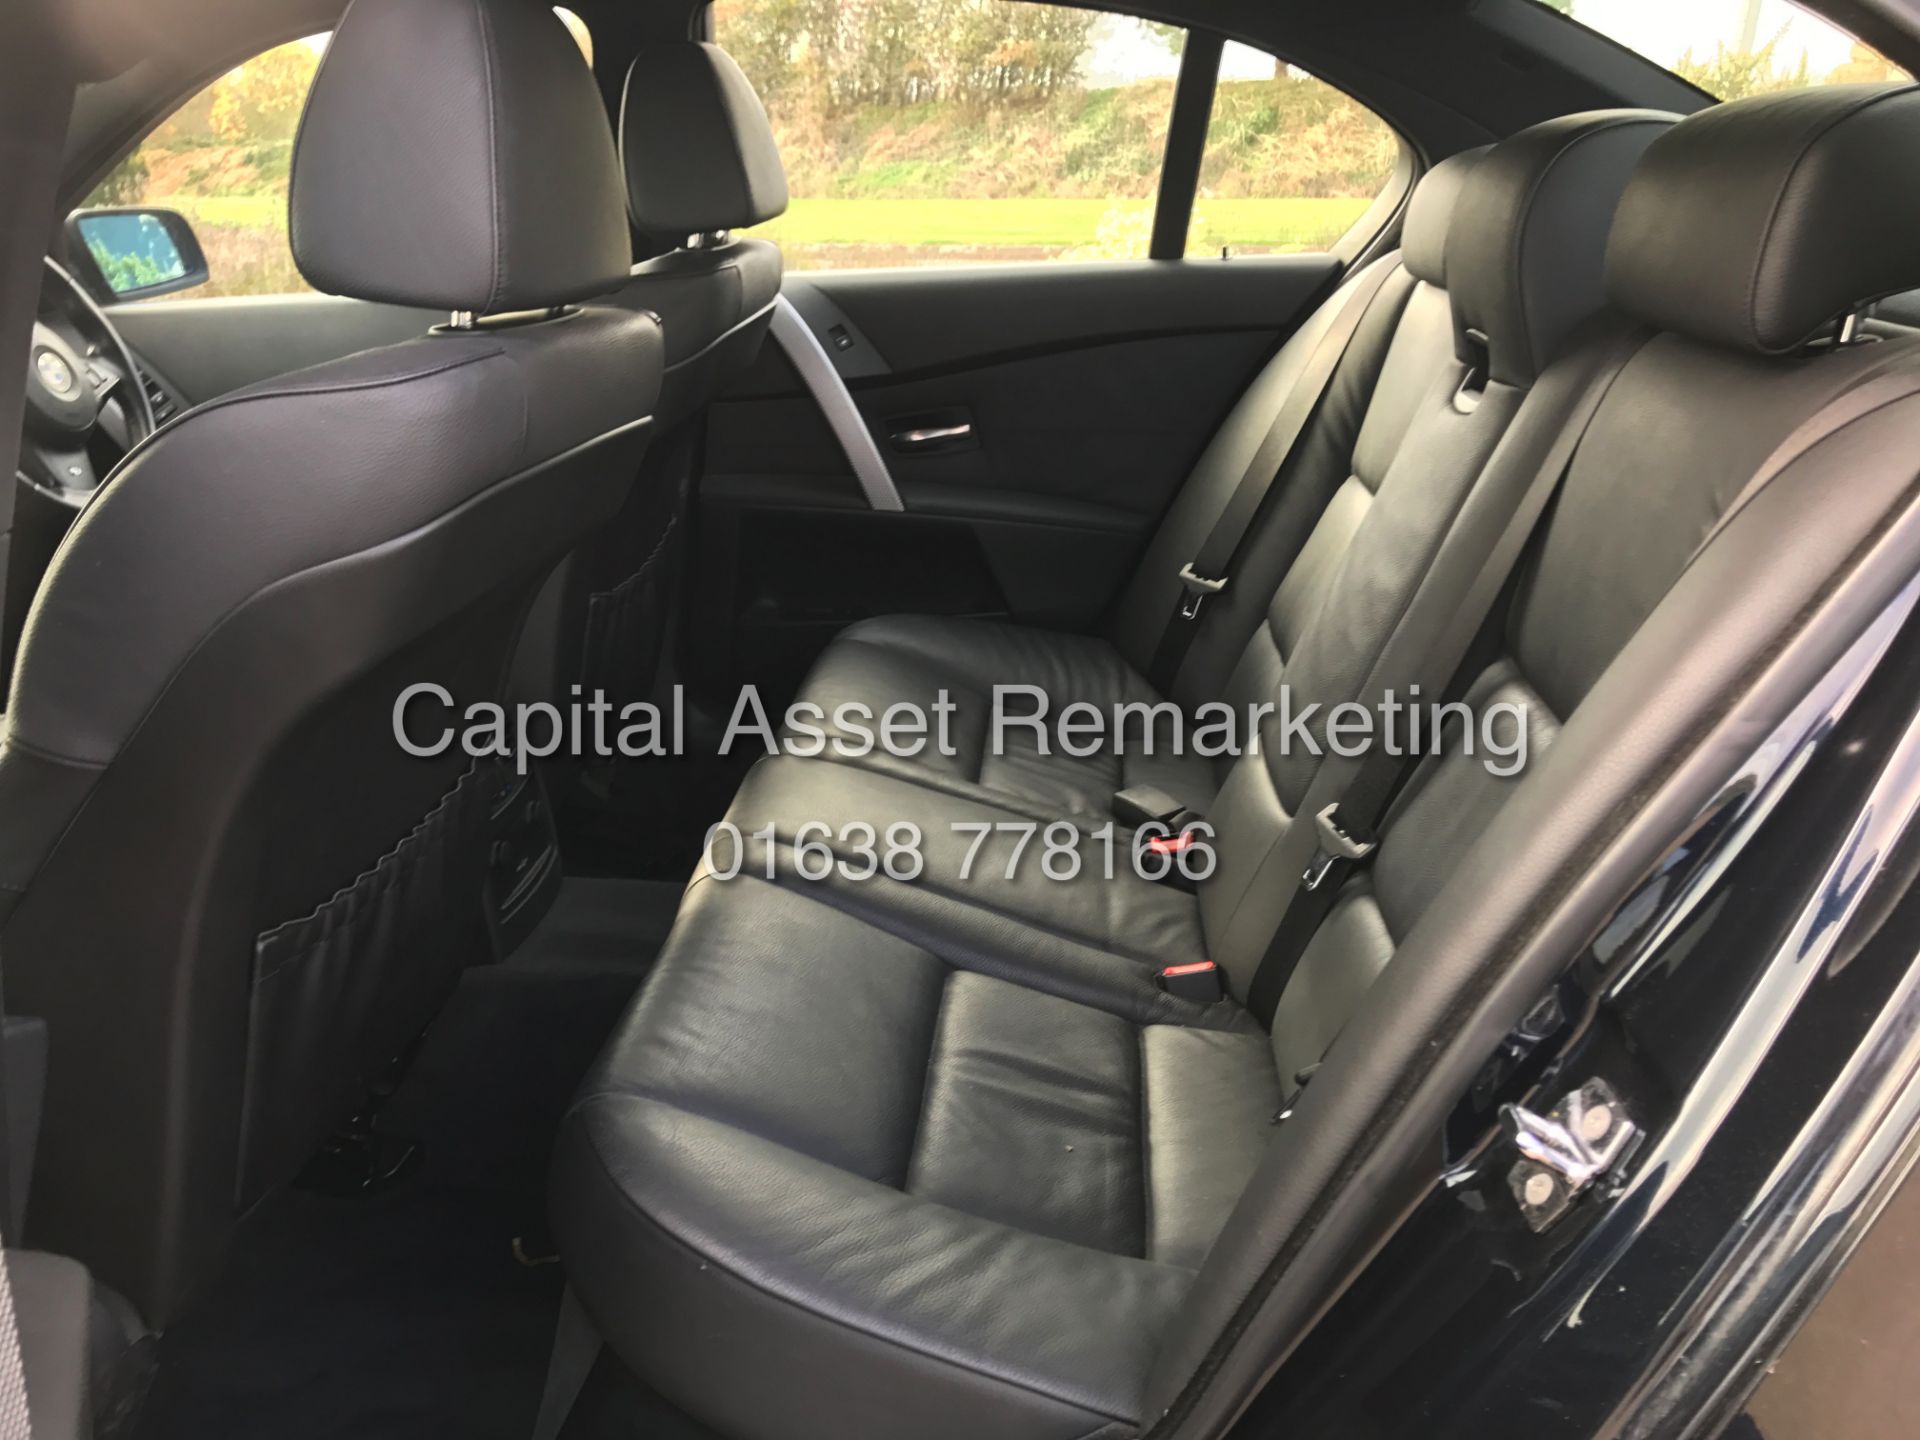 On Sale BMW 530D "M-SPORT" AUTO - FULL LEATHER -AIR CON -CRUISE CNTROL "GENUINE M-SPORT" NO VAT - Image 13 of 14